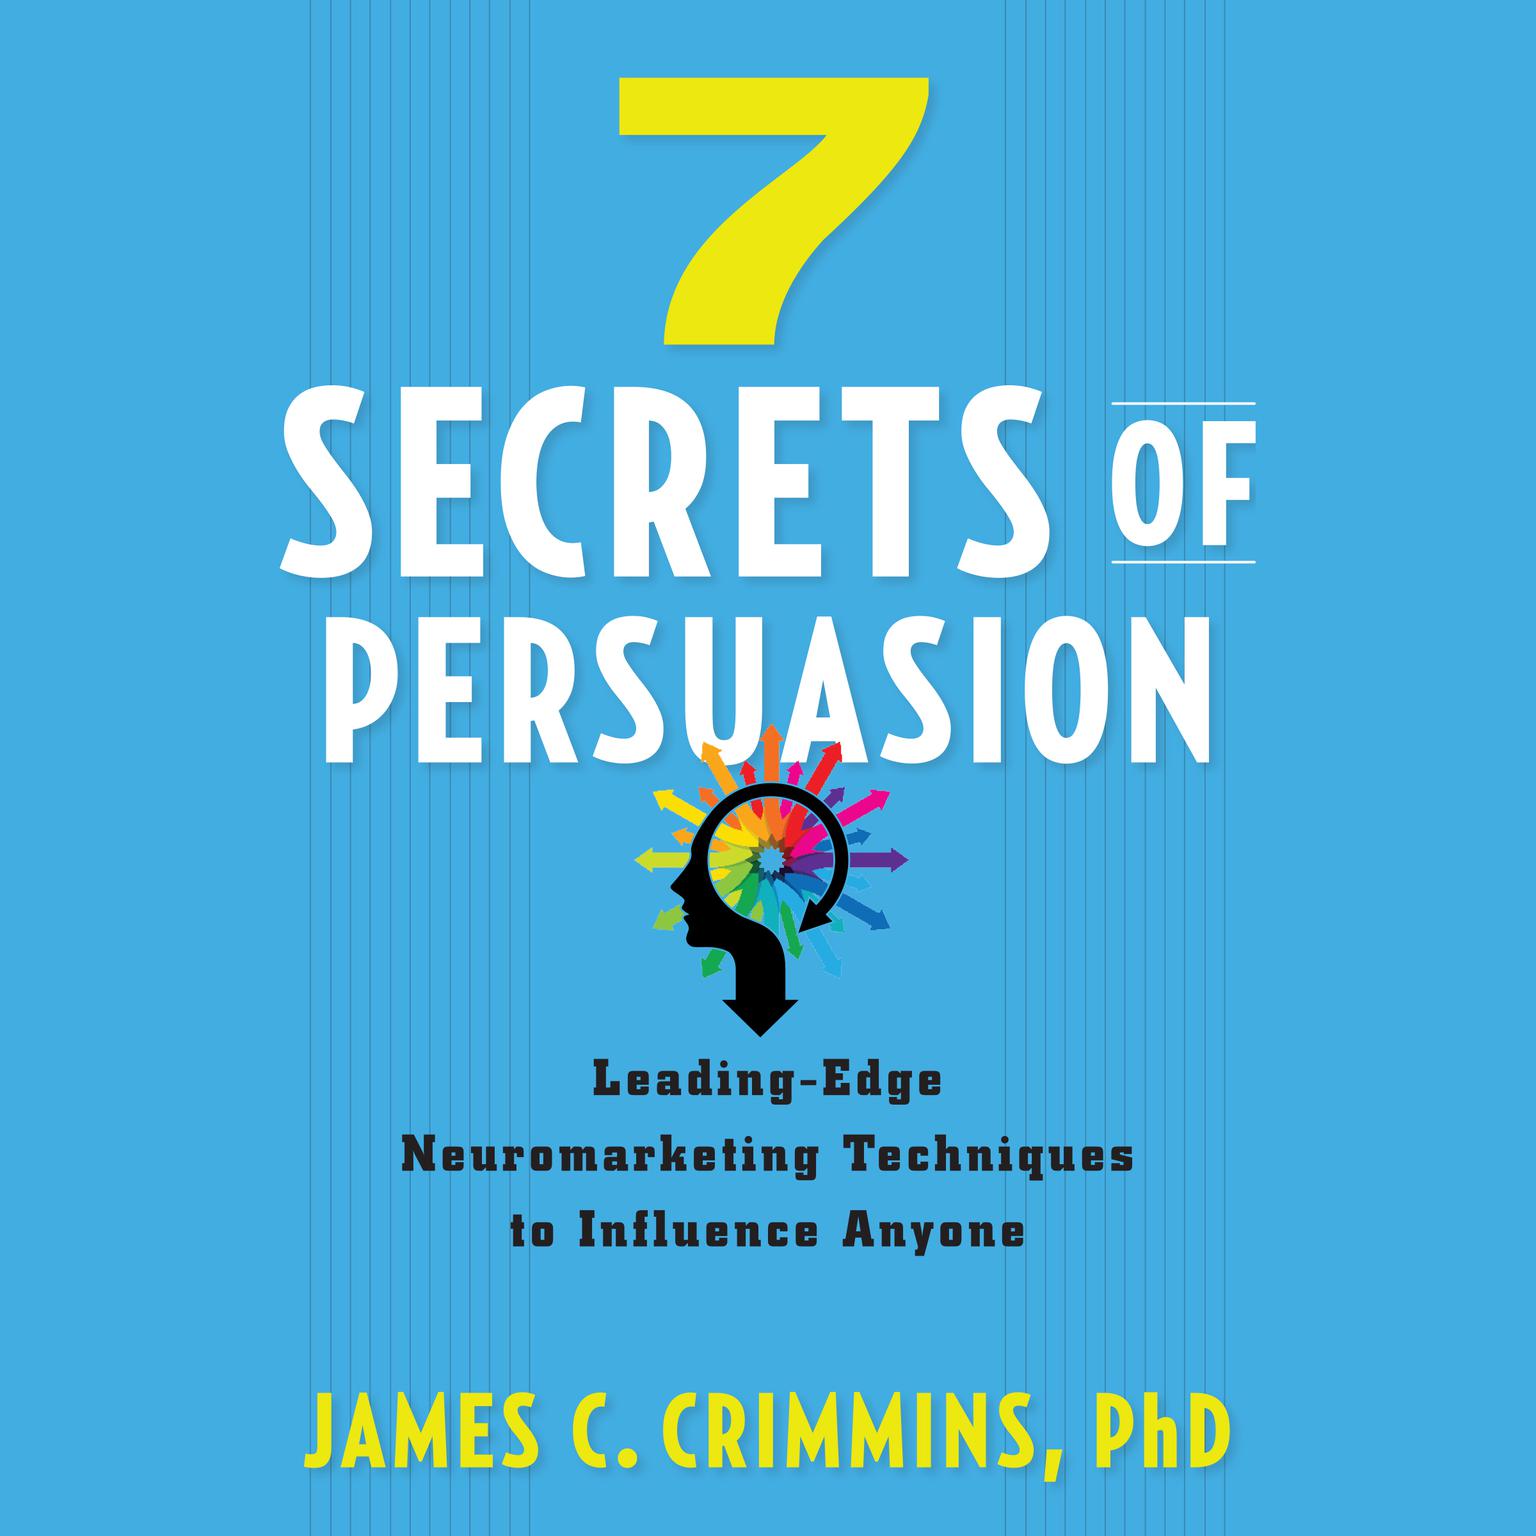 7 Secrets of Persuasion: Leading-Edge Neuromarketing Techniques to Influence Anyone Audiobook, by James C. Crimmins